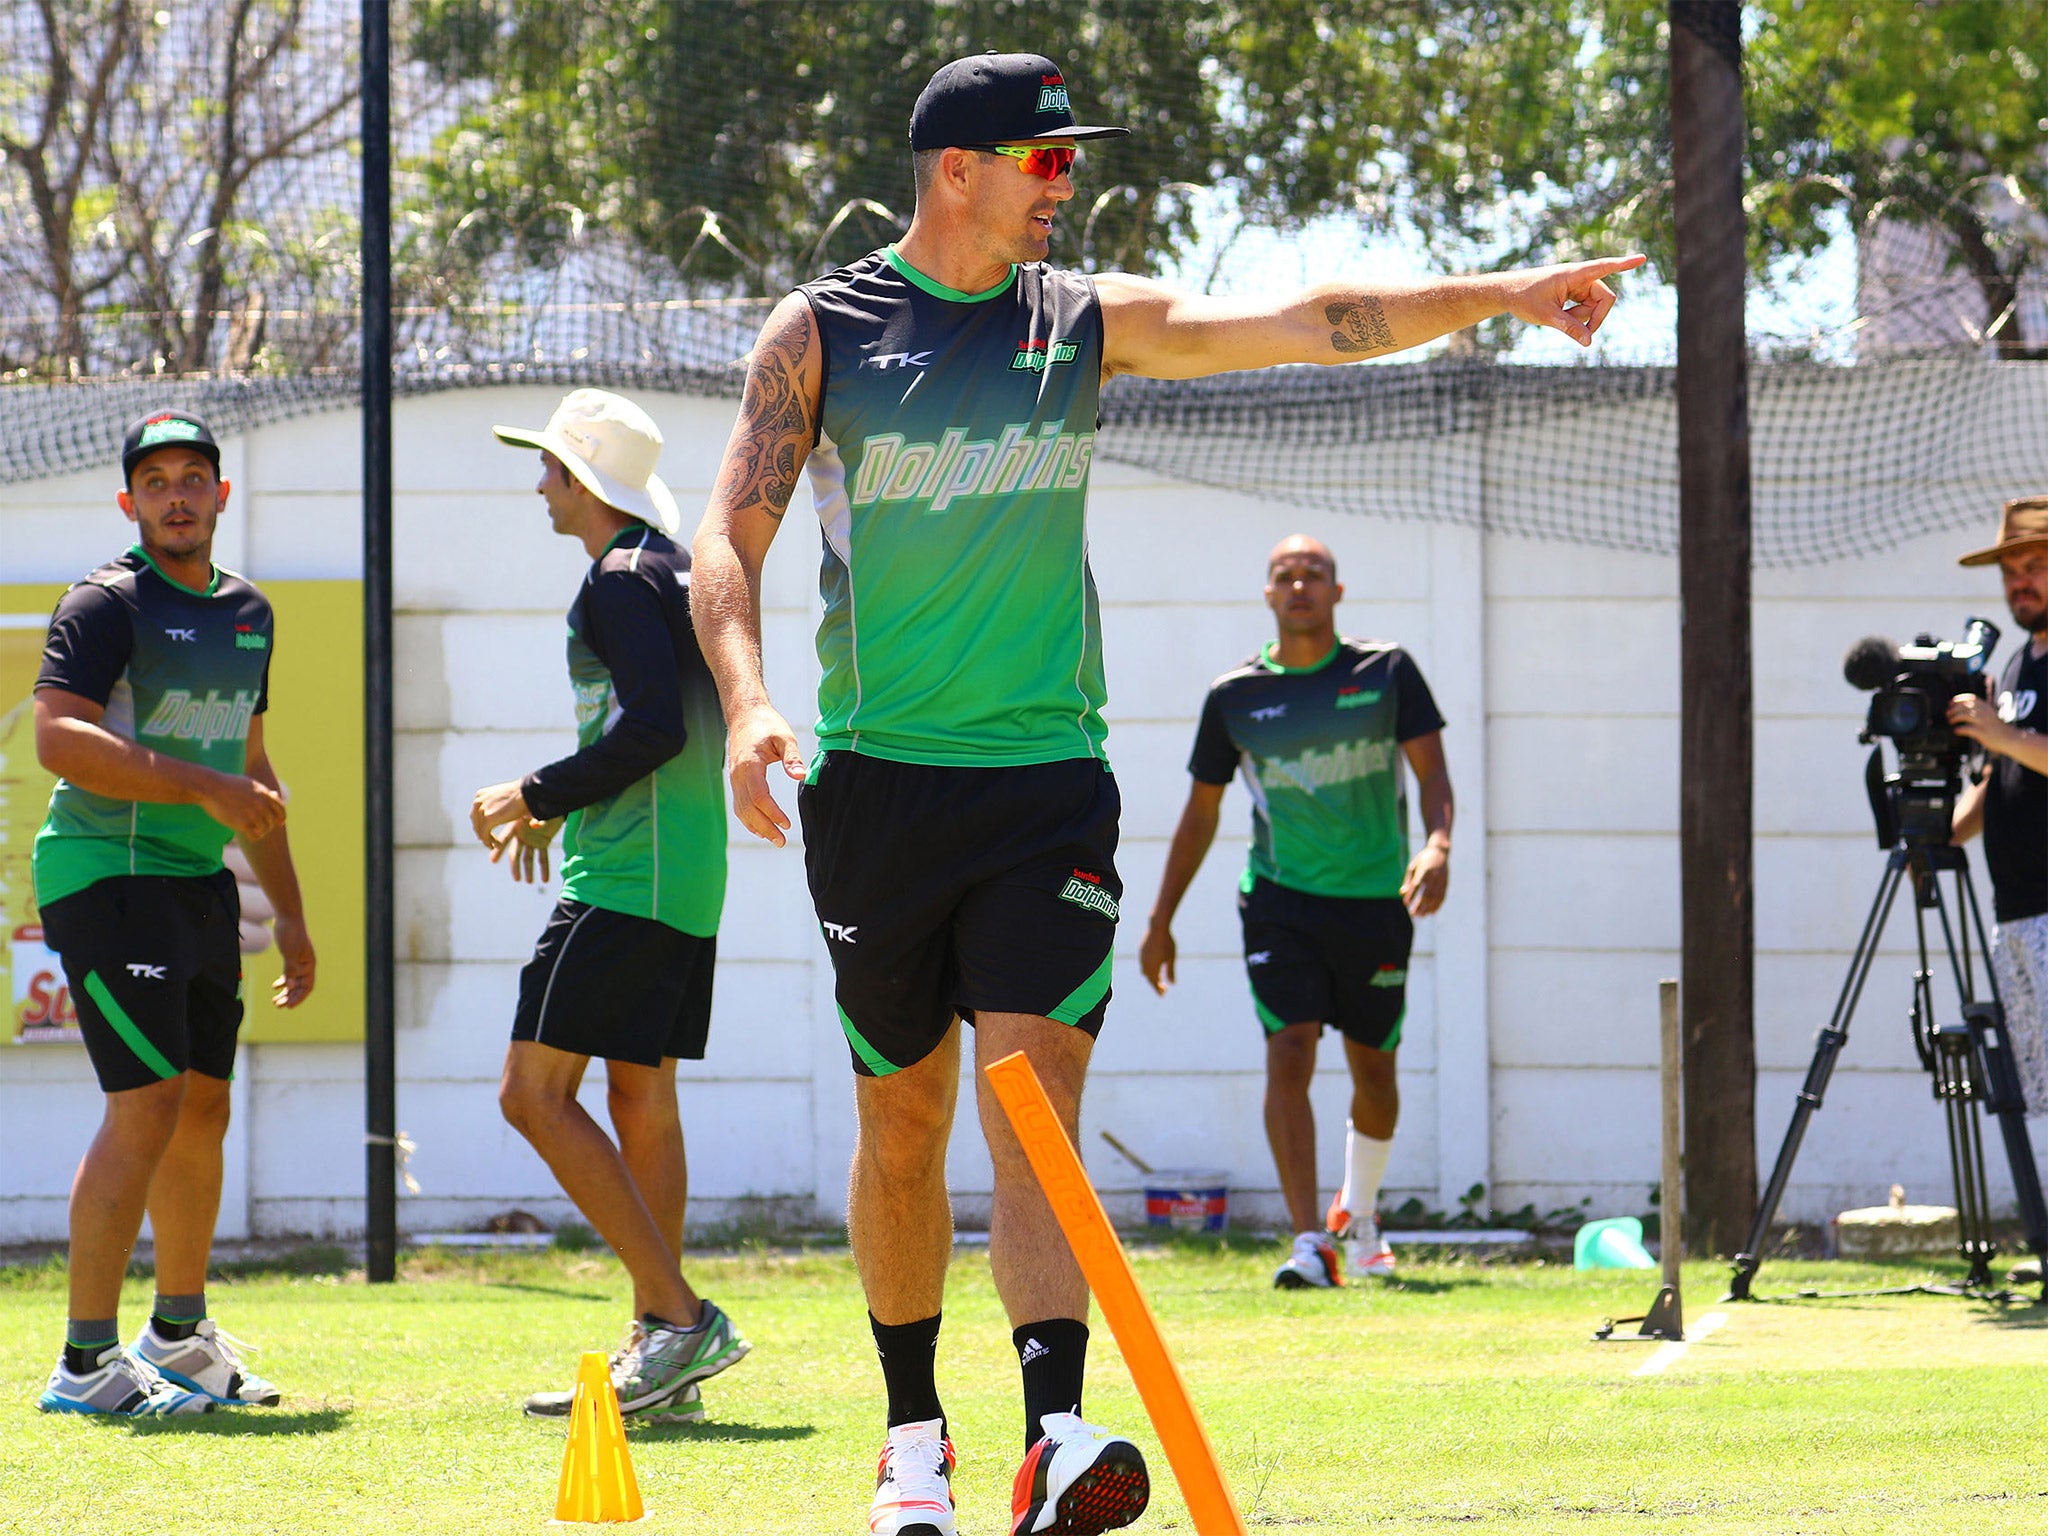 Kevin Pietersen makes a point in training with the Sunfoil Dolphins in South Africa last month, one of his stopovers as an itinerant T20 batsman